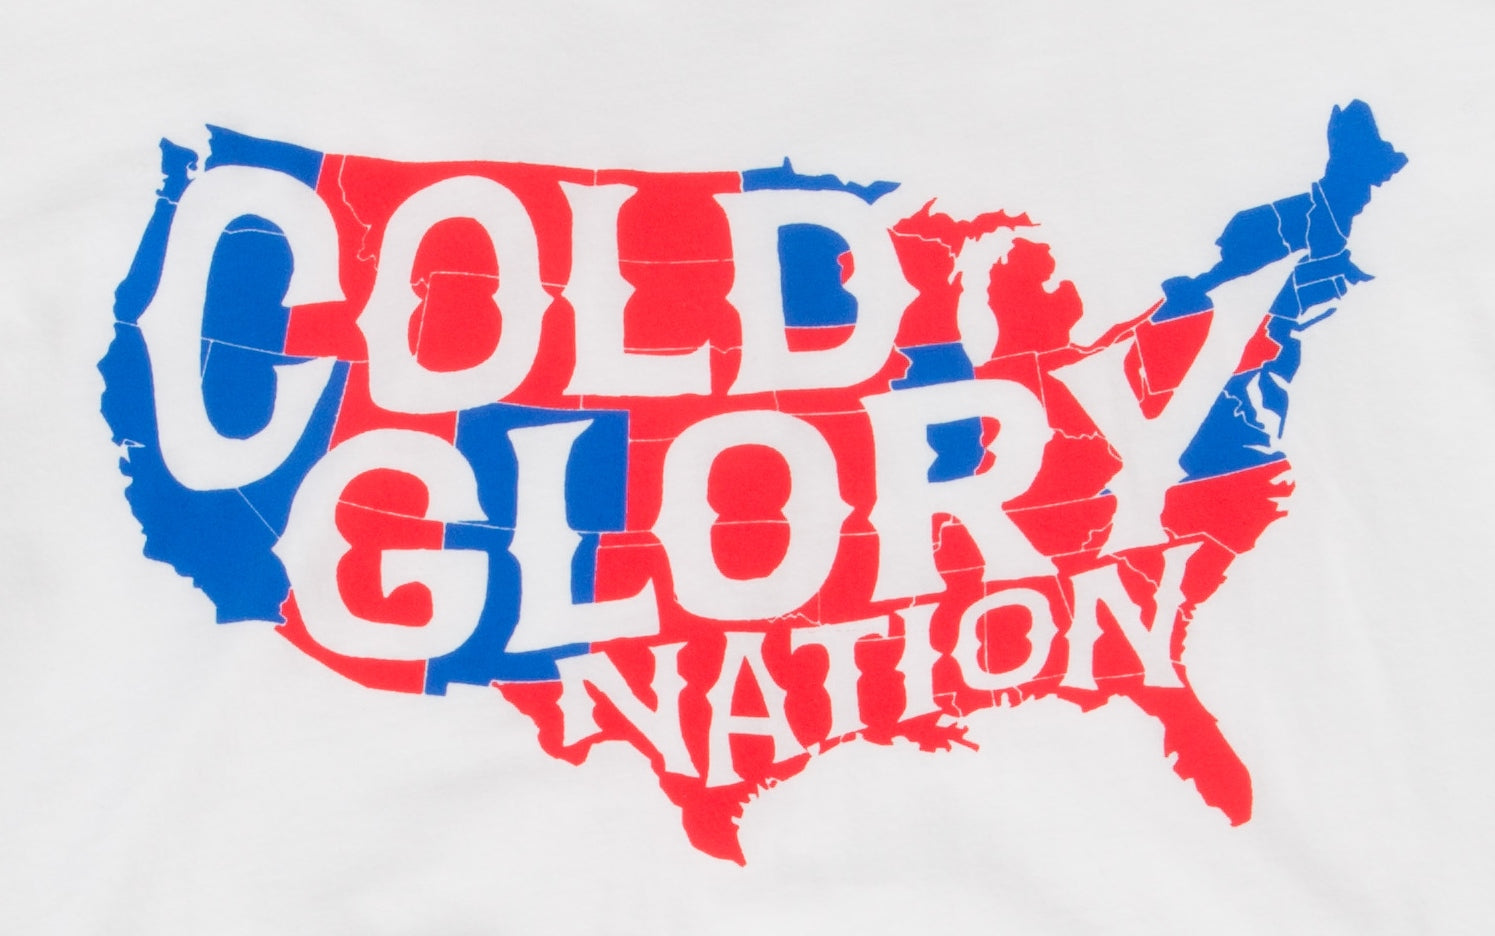 white t-shirt with usa map showing red states vs blue states of cold glory nation closeup